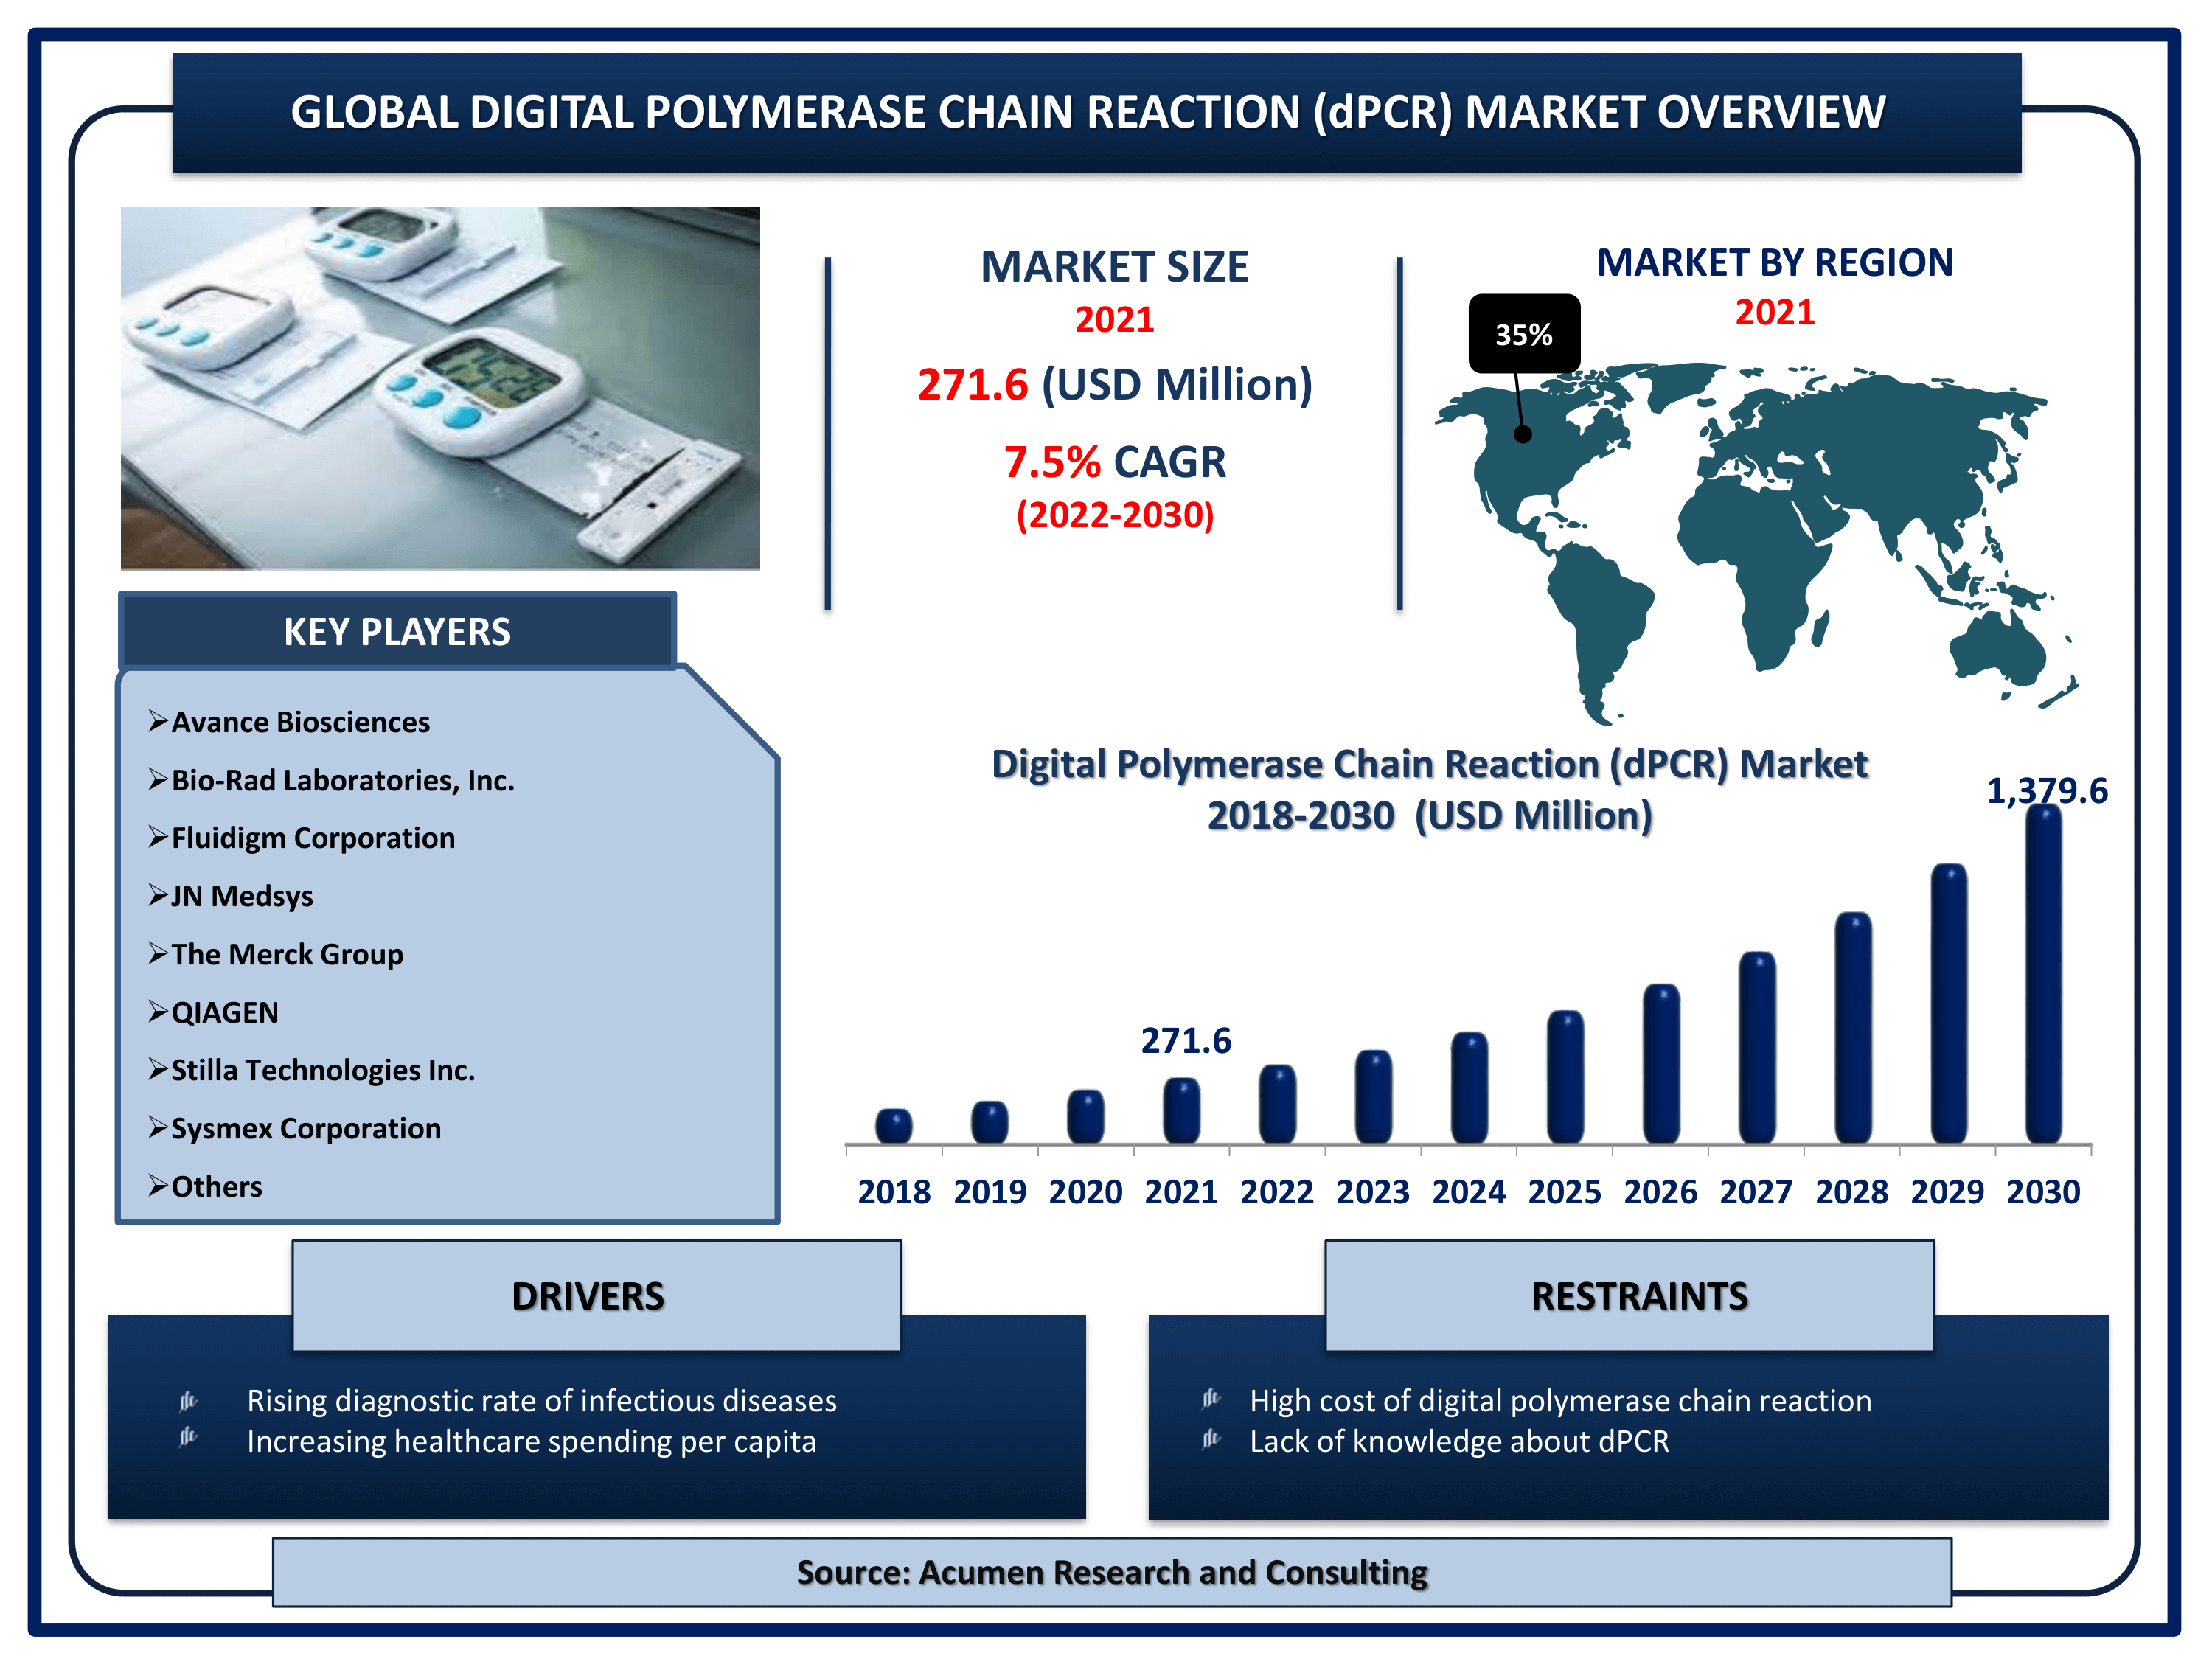 Global digital polymerase chain reaction market revenue is estimated to reach USD 1,379.6 Million by 2030 with a CAGR of 19.9% from 2022 to 2030